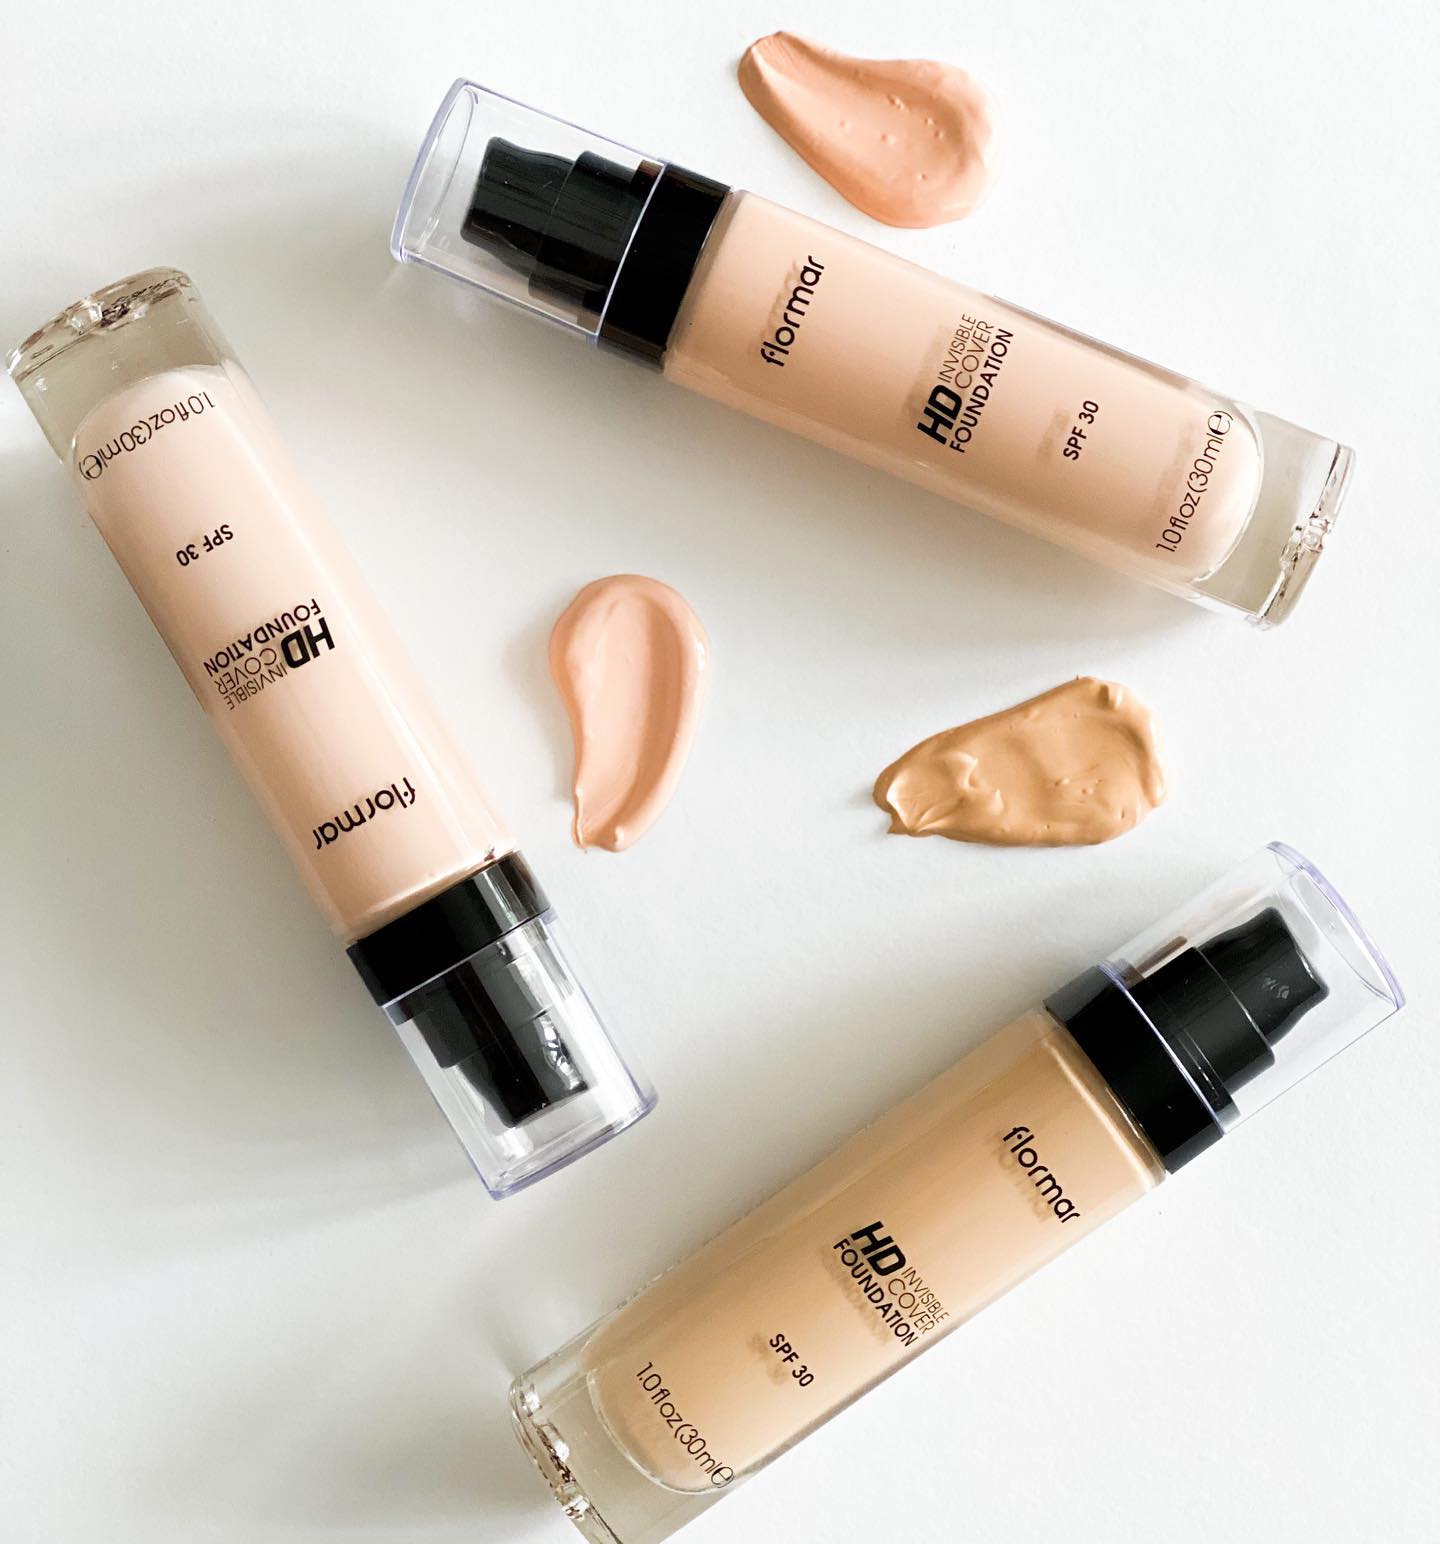 Grab this Perfect Coverage Foundation - Flormar Pakistan